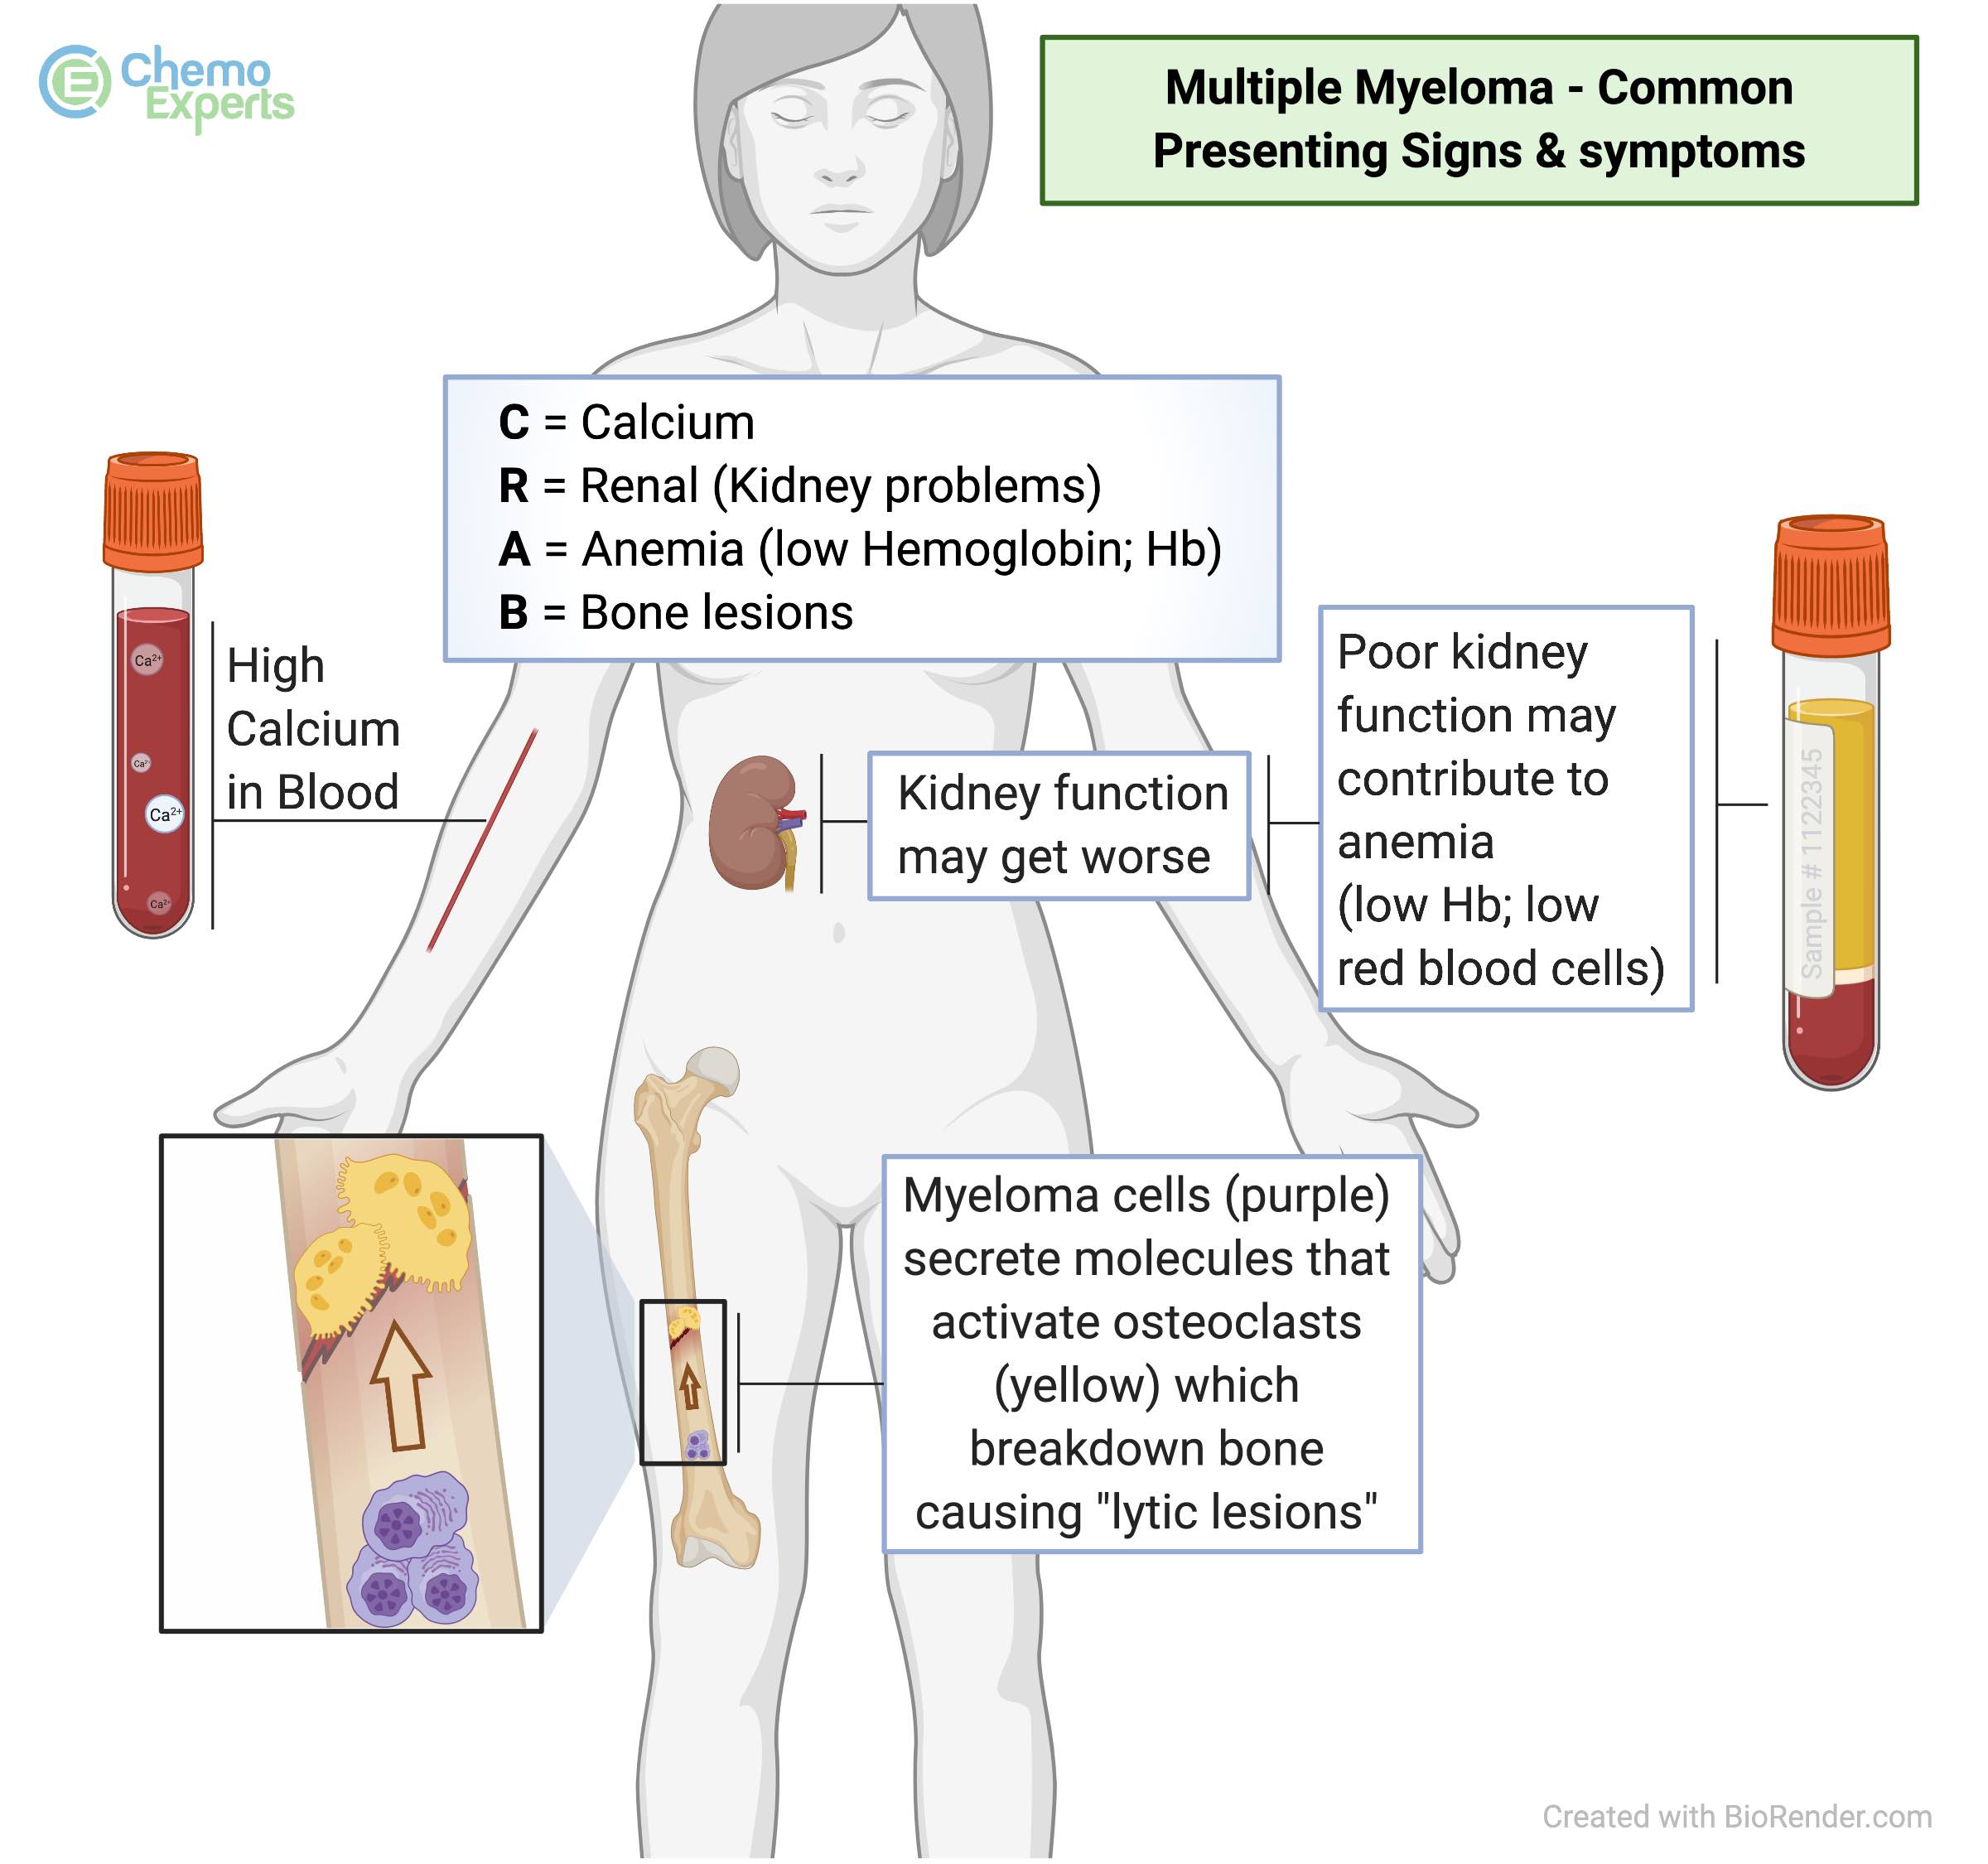 Multiple myeloma commonly affects the following body parts: bone, blood, and kidneys